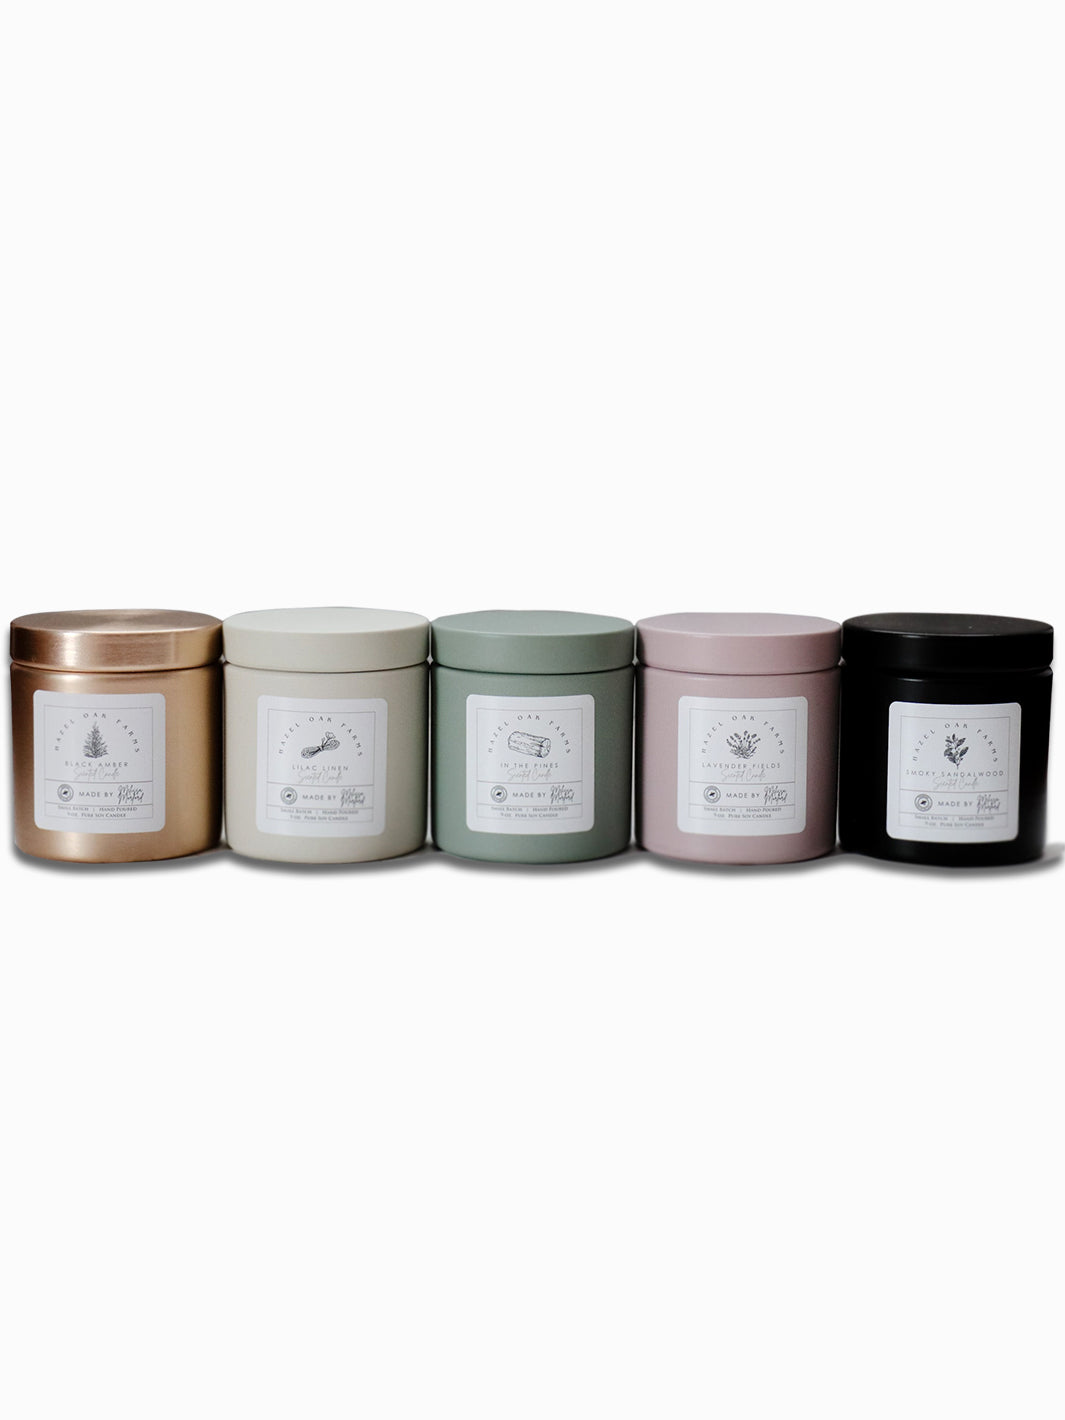 Lilac and Linen - Melissa's Pure Soy Candles (in stock) Earthly Comfort Home Decor 2196-1